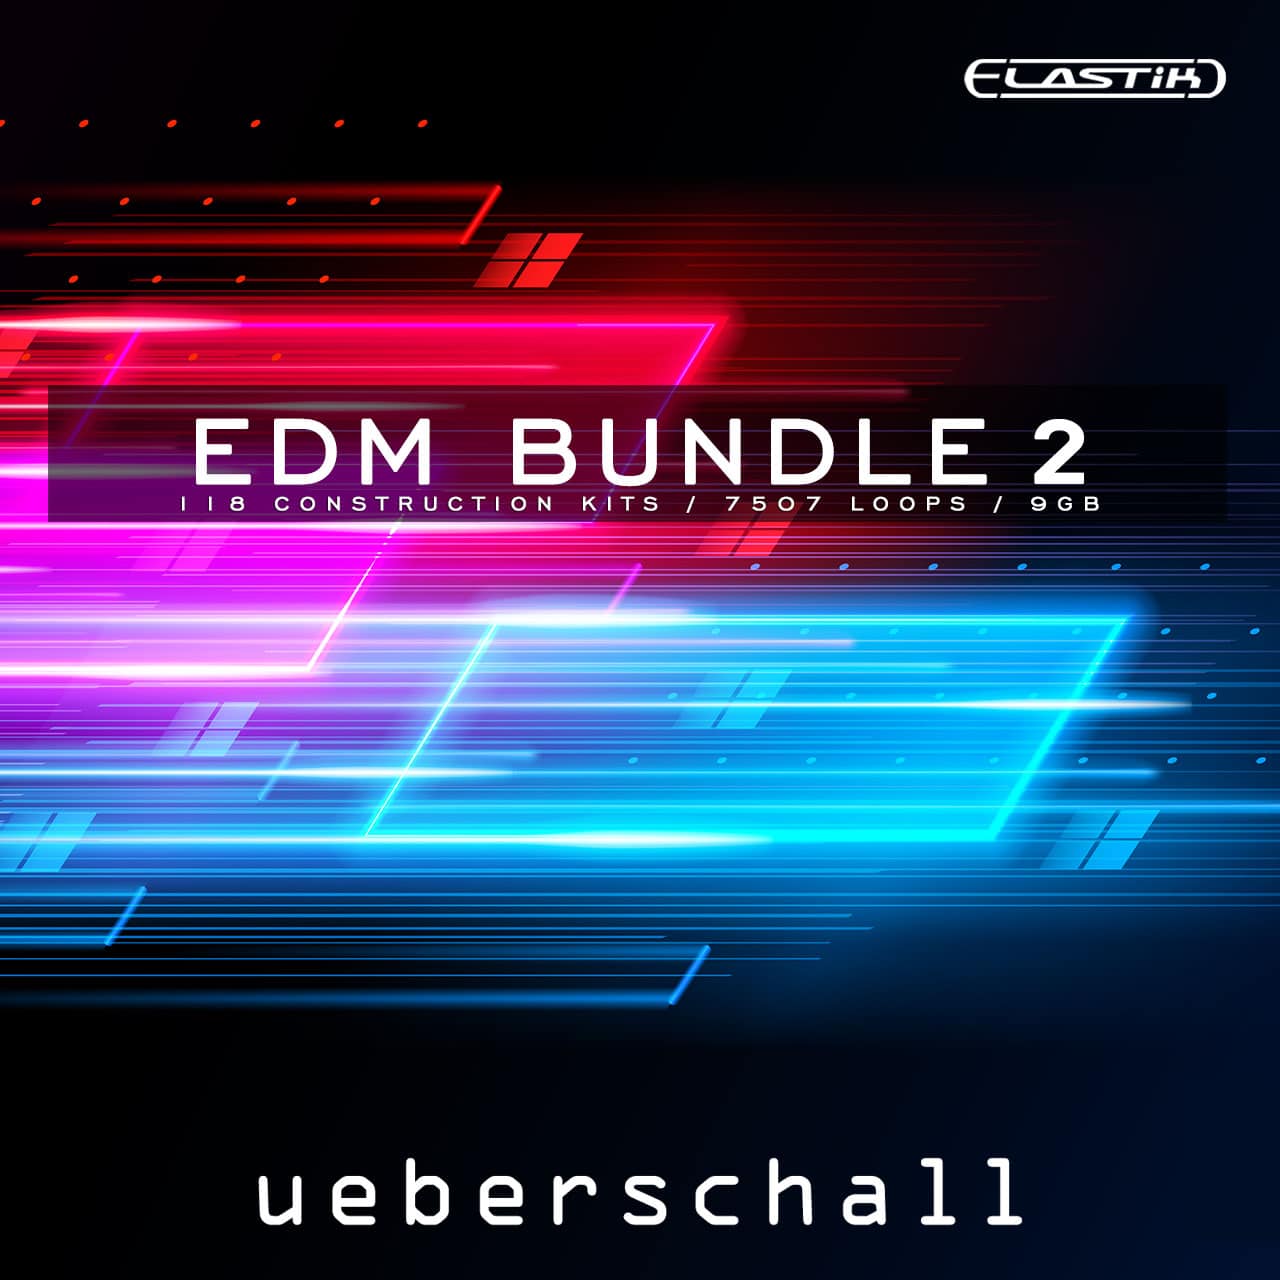 EDM Bundle 2 by Ueberschall – The Sample Meisters from Germany